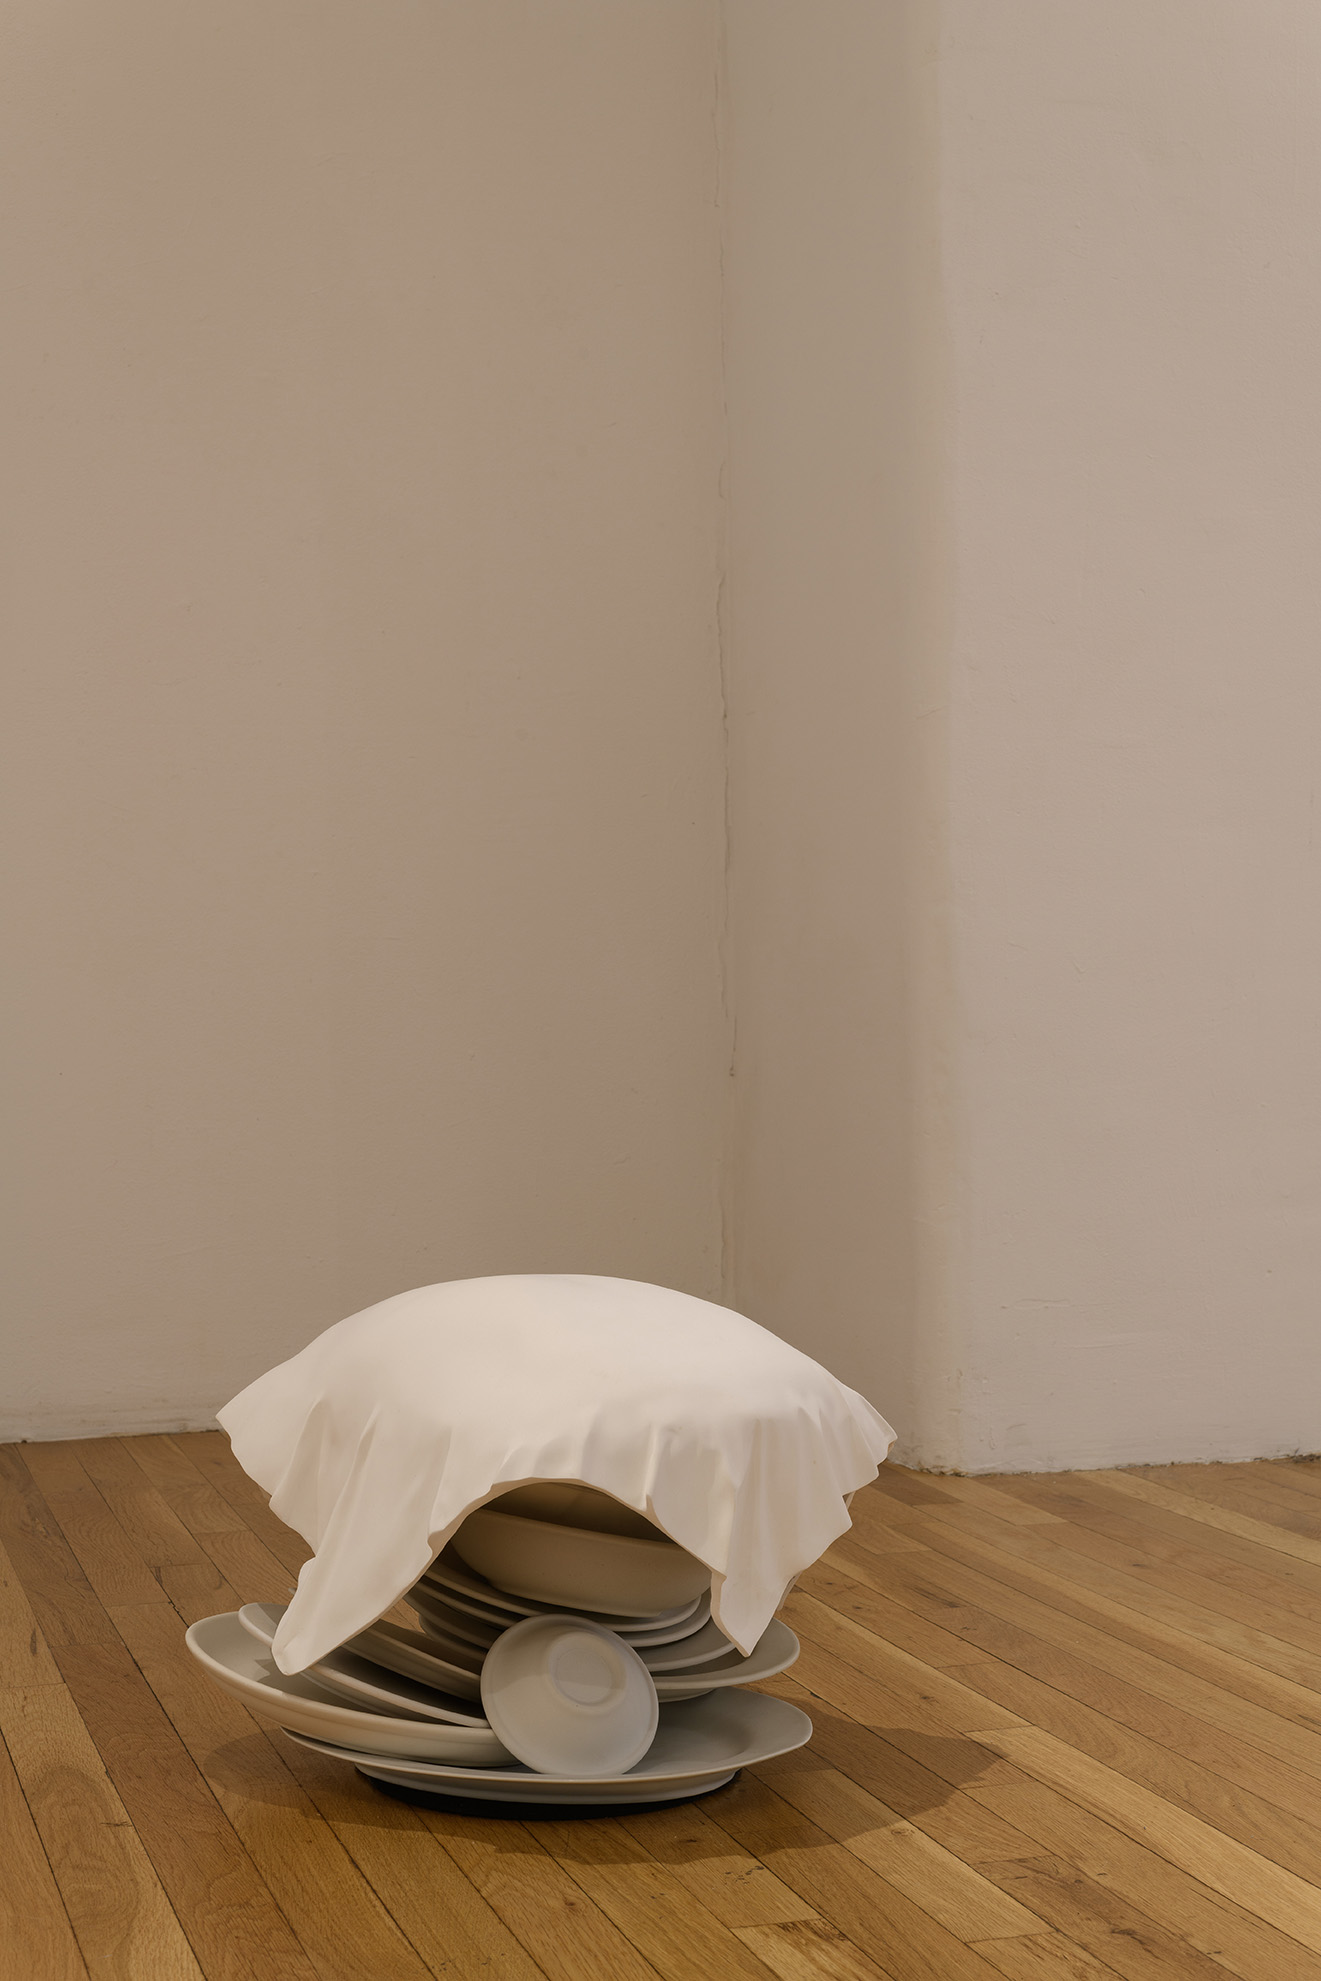 [A cream-colored sculpture sitting directly on the floor. The sculpture appears to be a stack of dishes with a cloth draped over them. Plates, bowls and platters. On closer inspection the cloth has the shape of a person's back, bending over as though picking something up off the floor. On even closer inspection, the back-shaped-cloth turns out to be a solid material closer in makeup to the dishes it covers than to textile or flesh.]